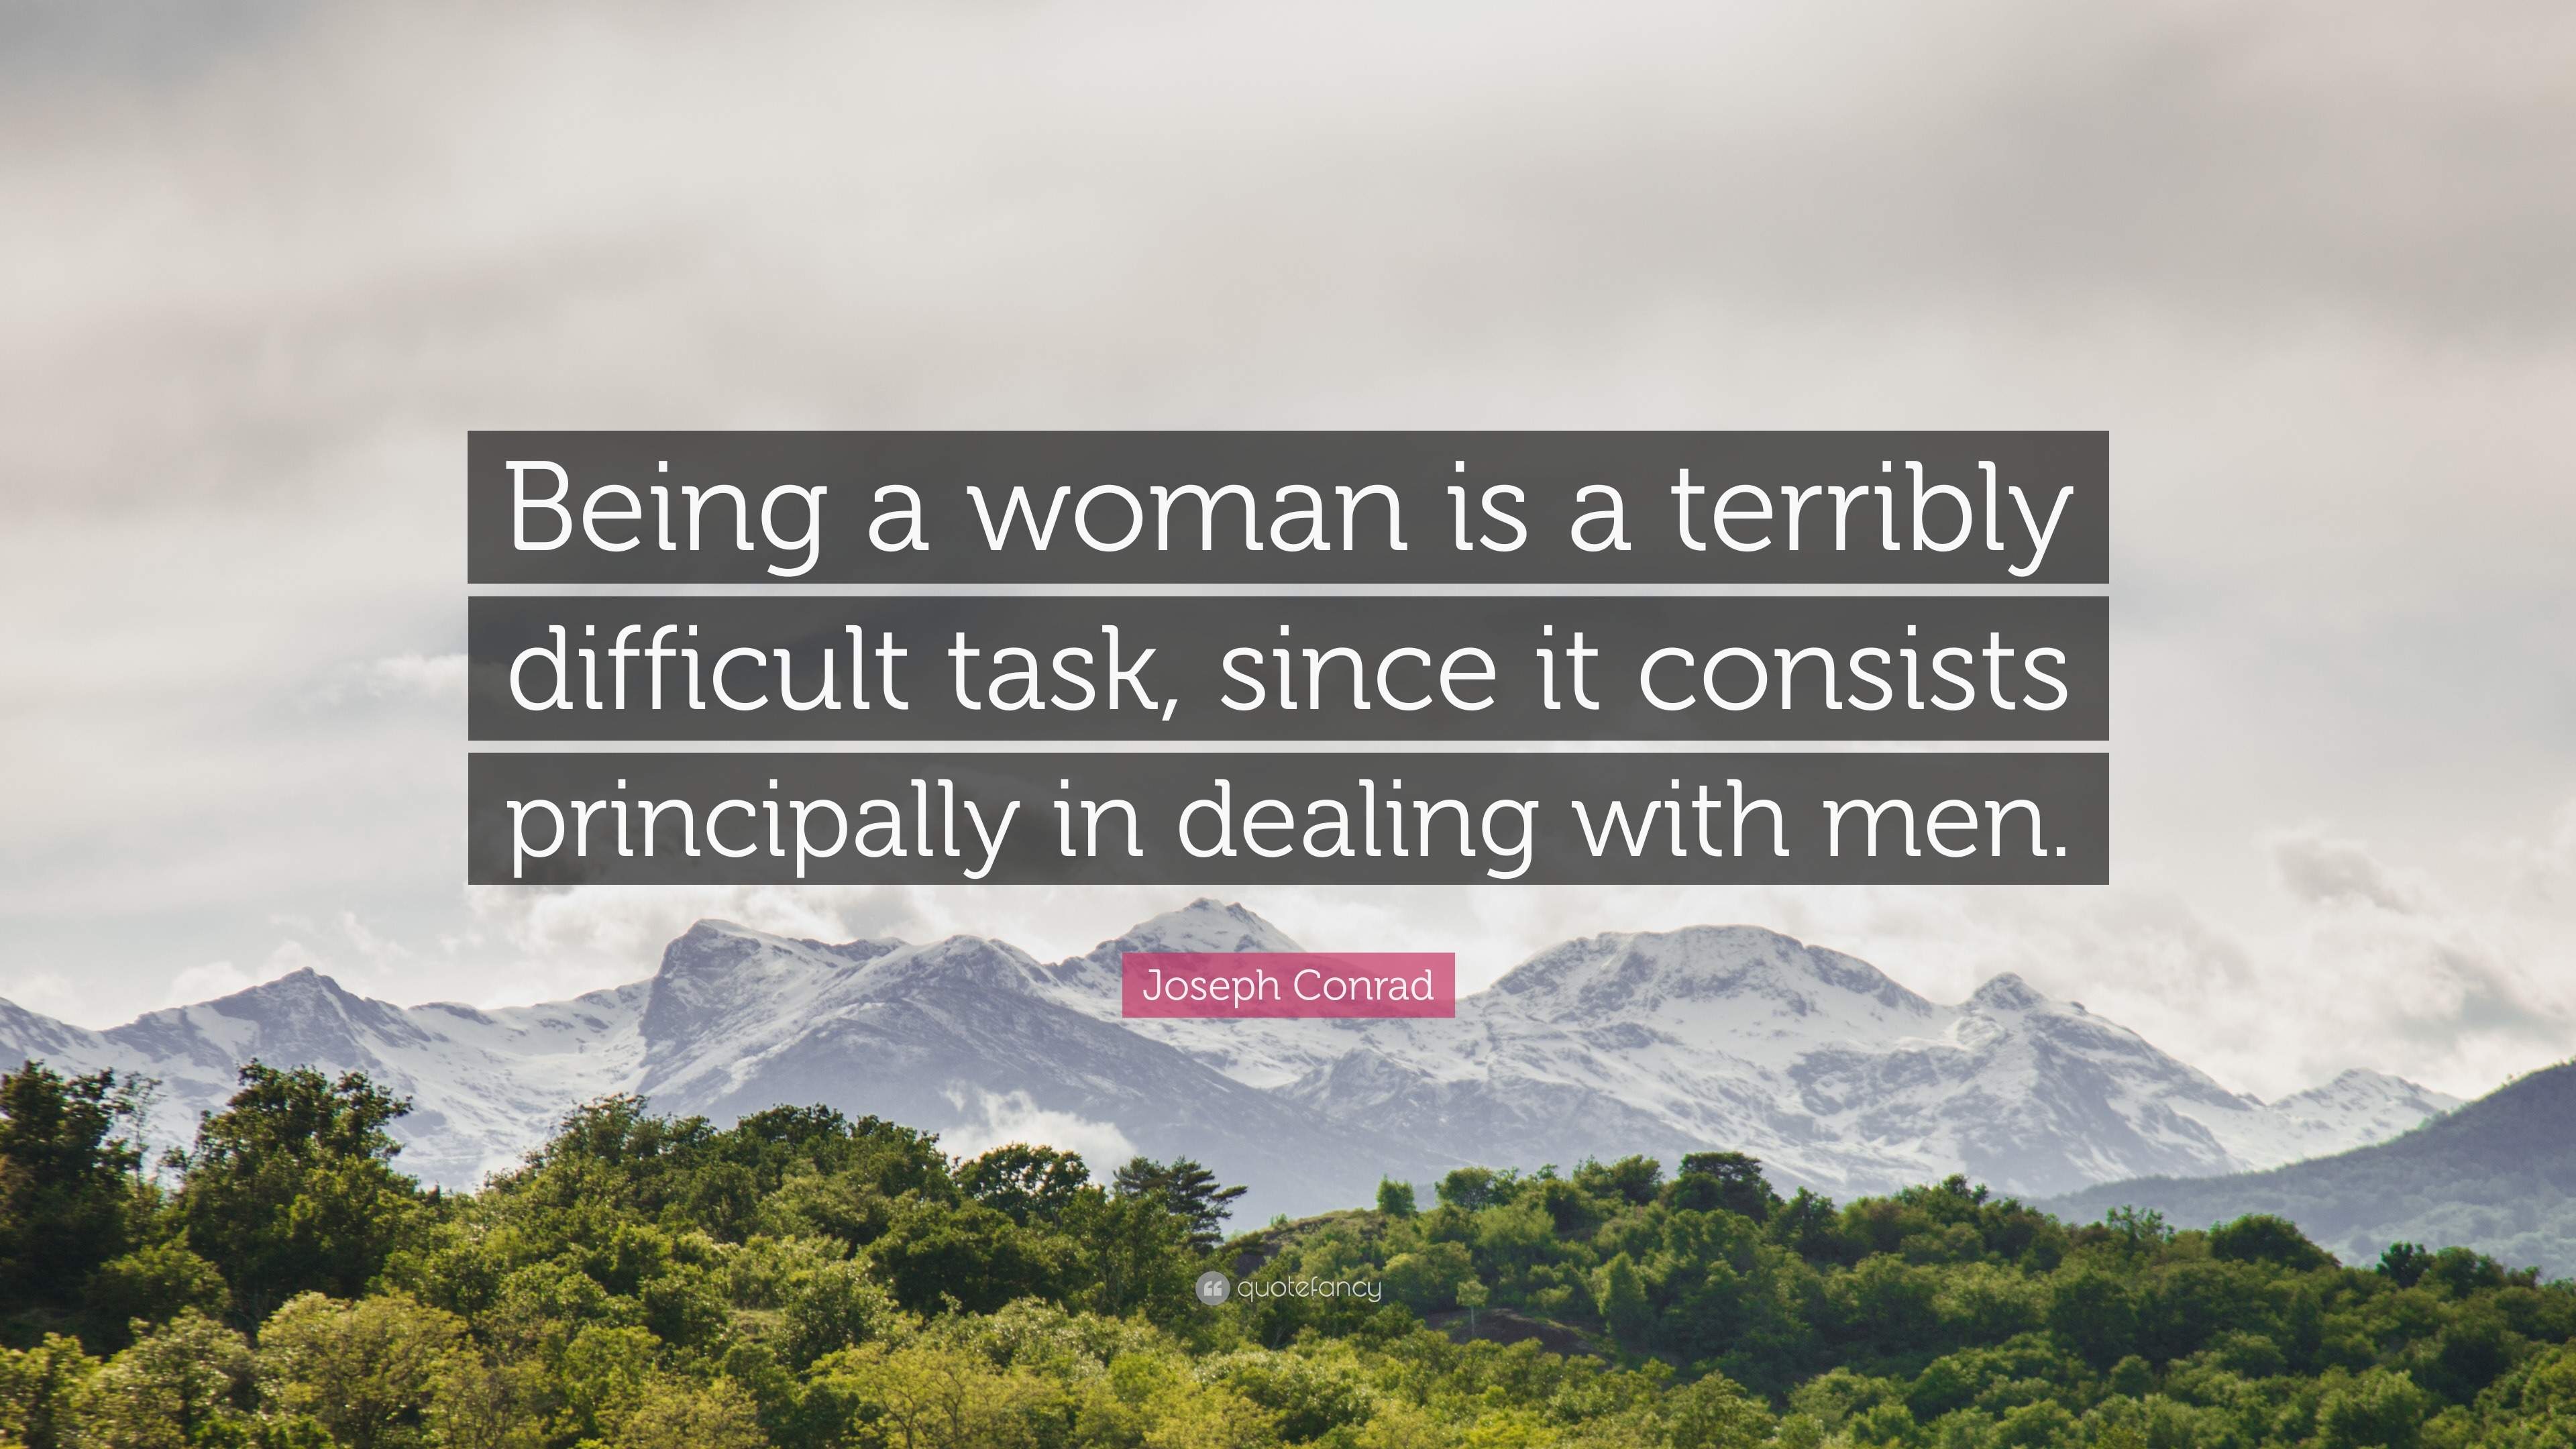 Joseph Conrad Quote: “Being a woman is a terribly difficult task, since ...